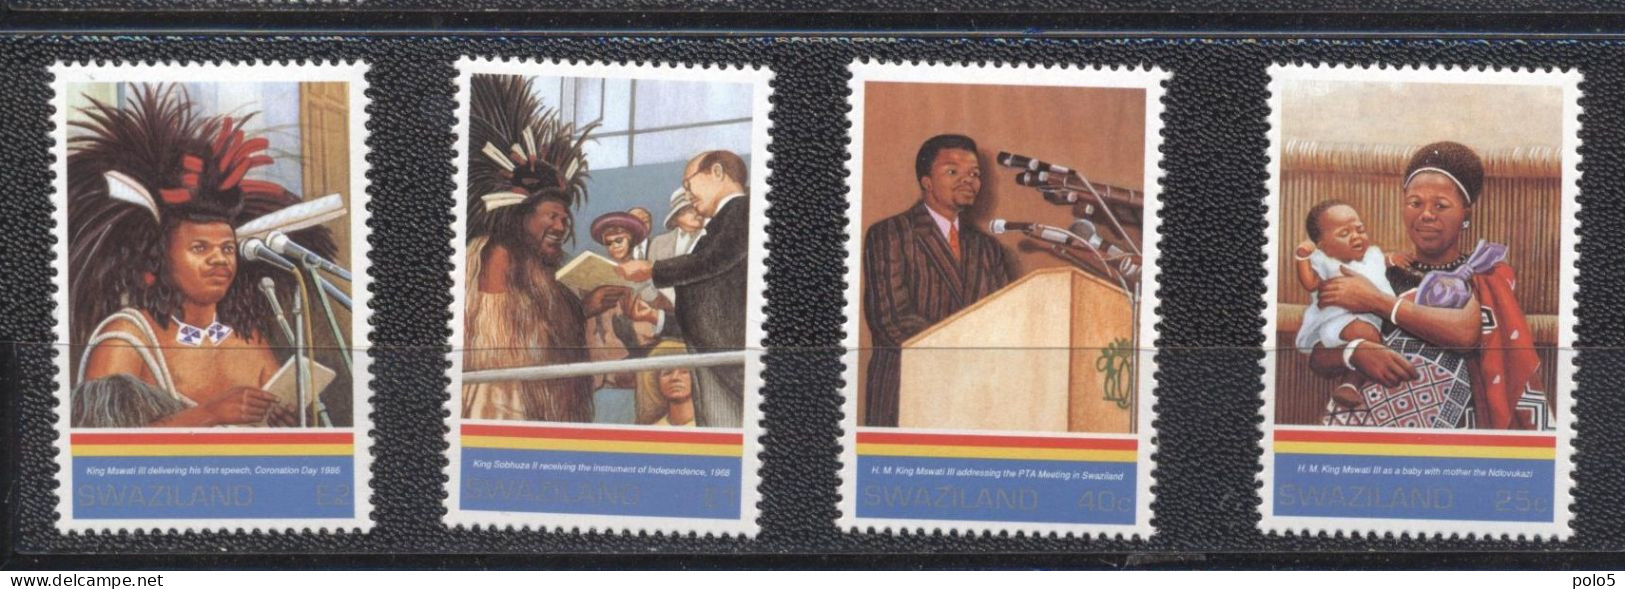 Swaziland 1993 - The 25 Th Anniversary Of The Birth Of King Mswati III And 25 Th Anniversary Of Independance Set(4v) - Swaziland (1968-...)